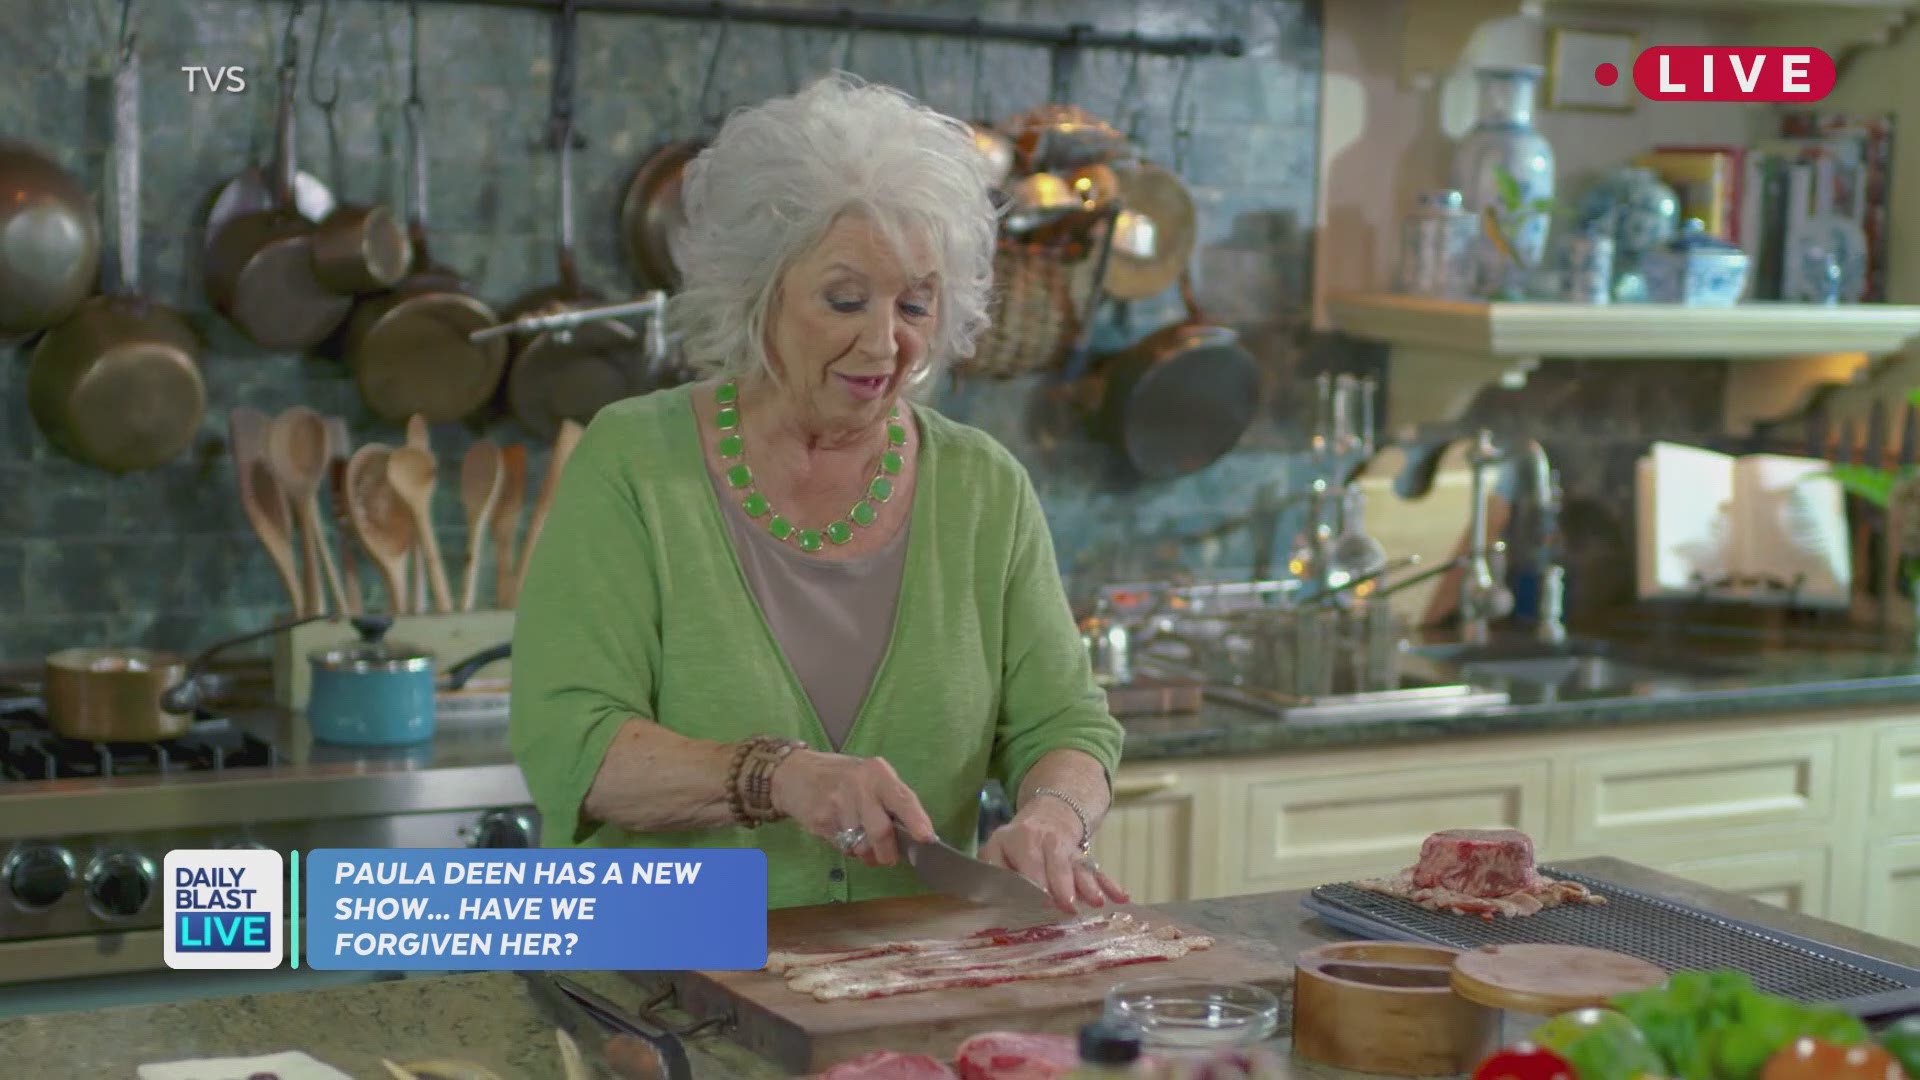 Paula Deen is making her way back to TV. Her new show, "Positively Paula," is a nationally syndicated show that is available in over 180 million homes. The lifestyle/food show invites you to share a moment with a friend. Have we forgiven Paula?